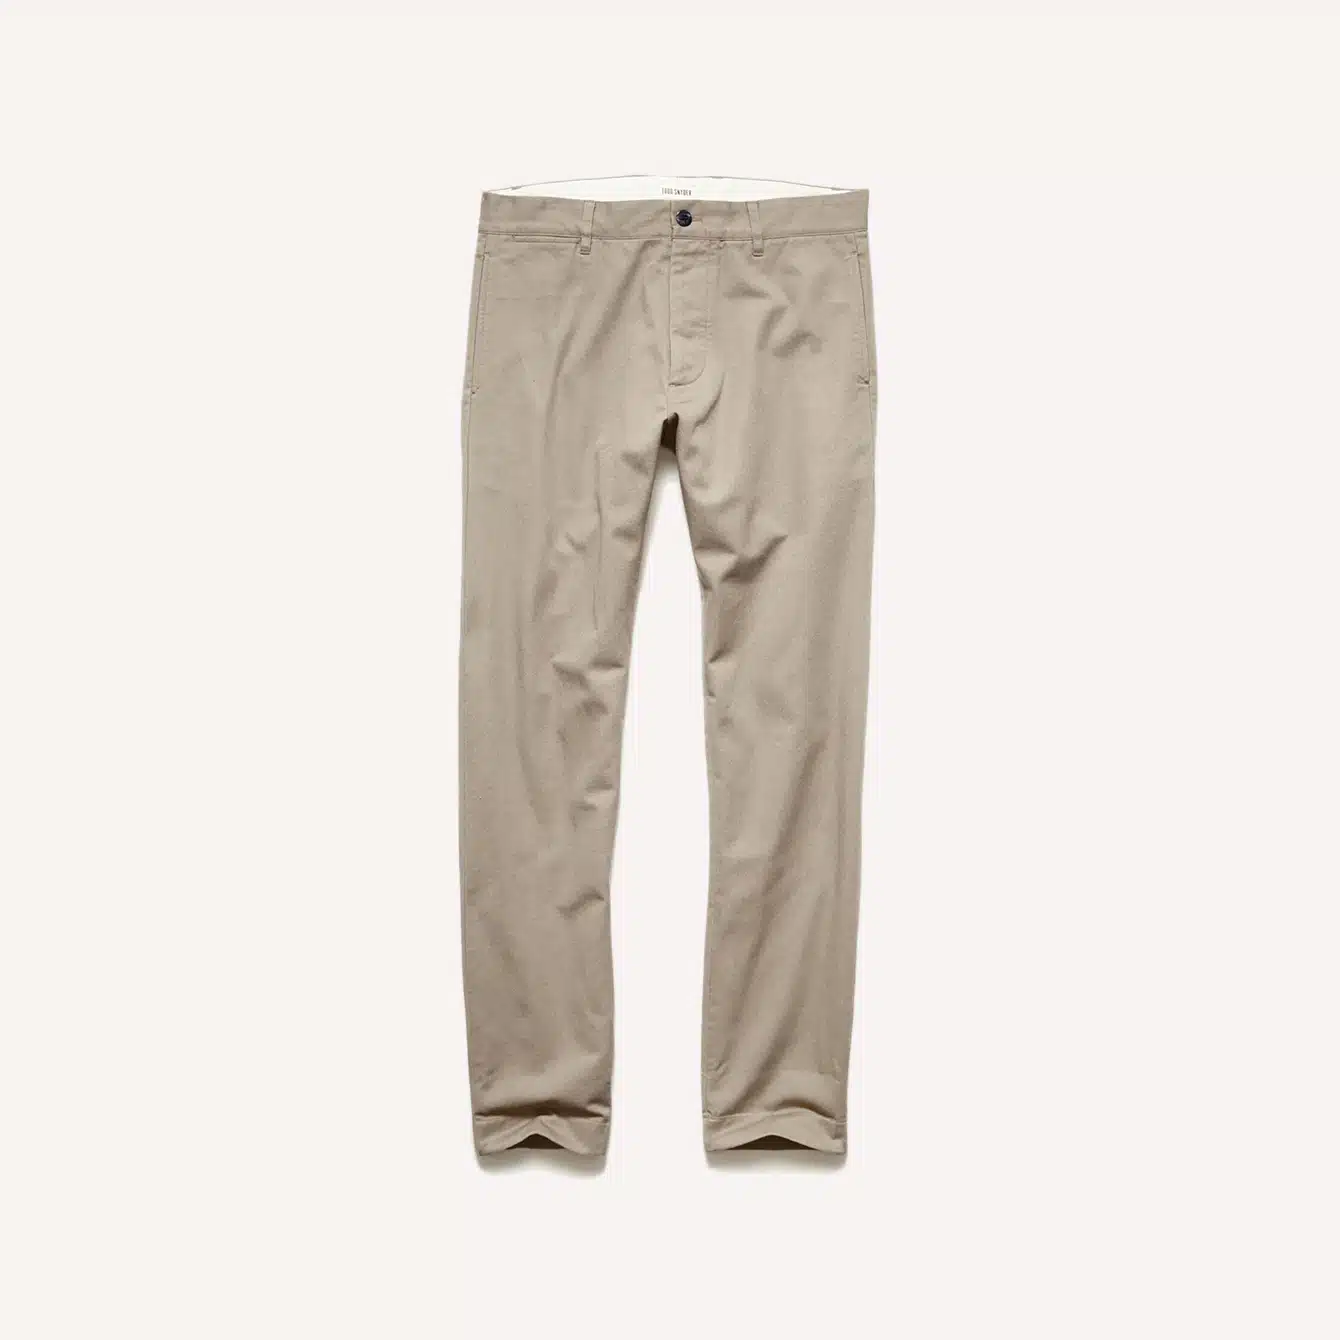 Todd Snyder Japanese Selvedge Chino Pant